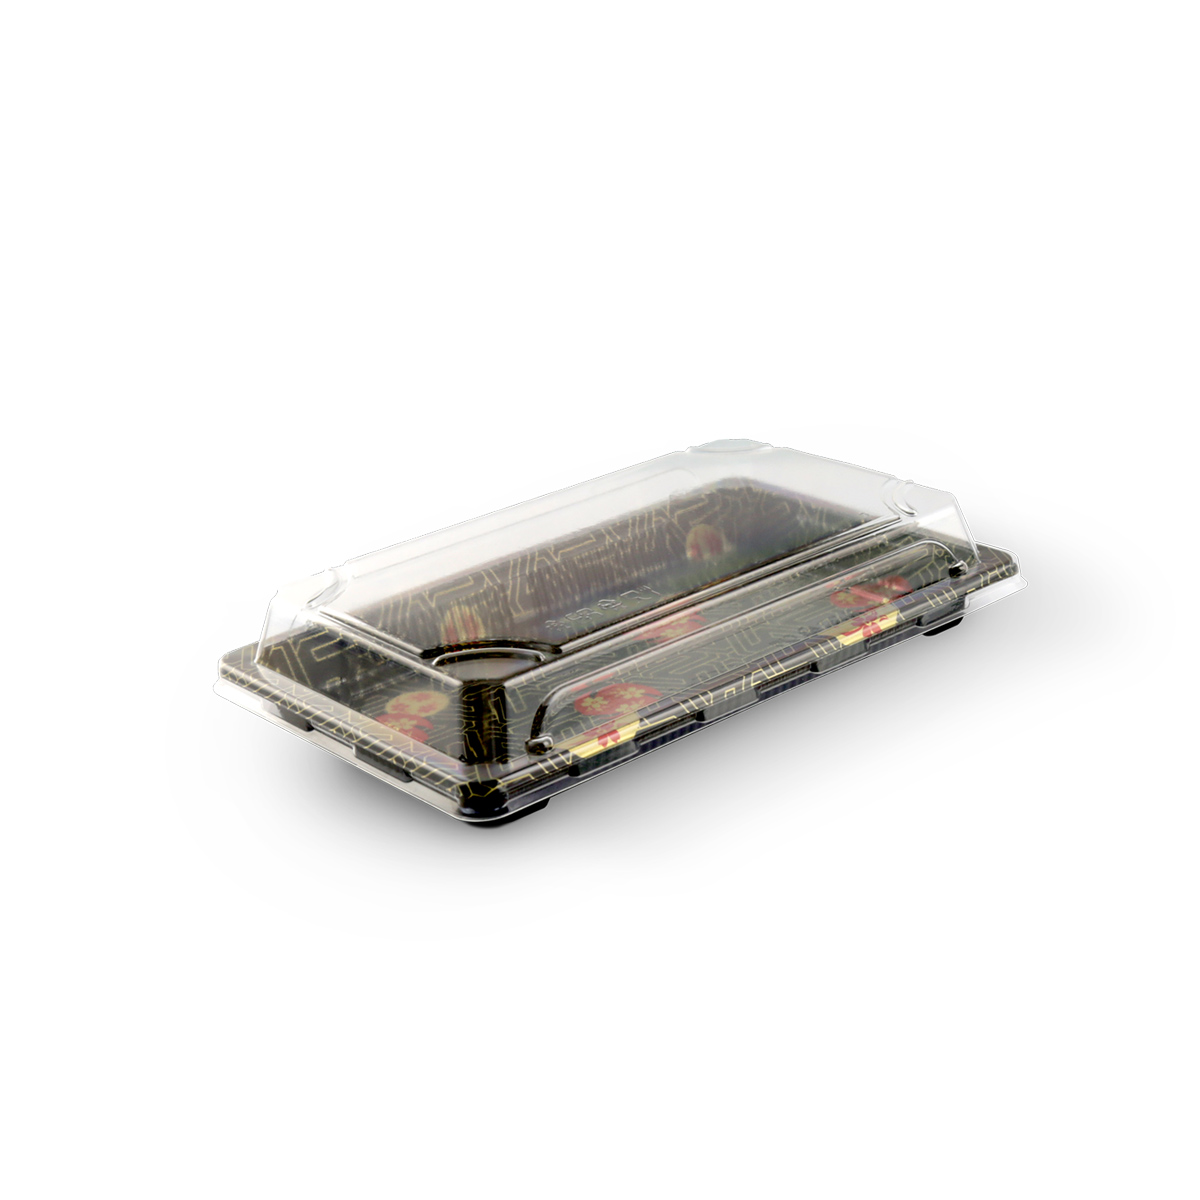 Sushi Container with Lid (Rectangular Shape, Black Colour )